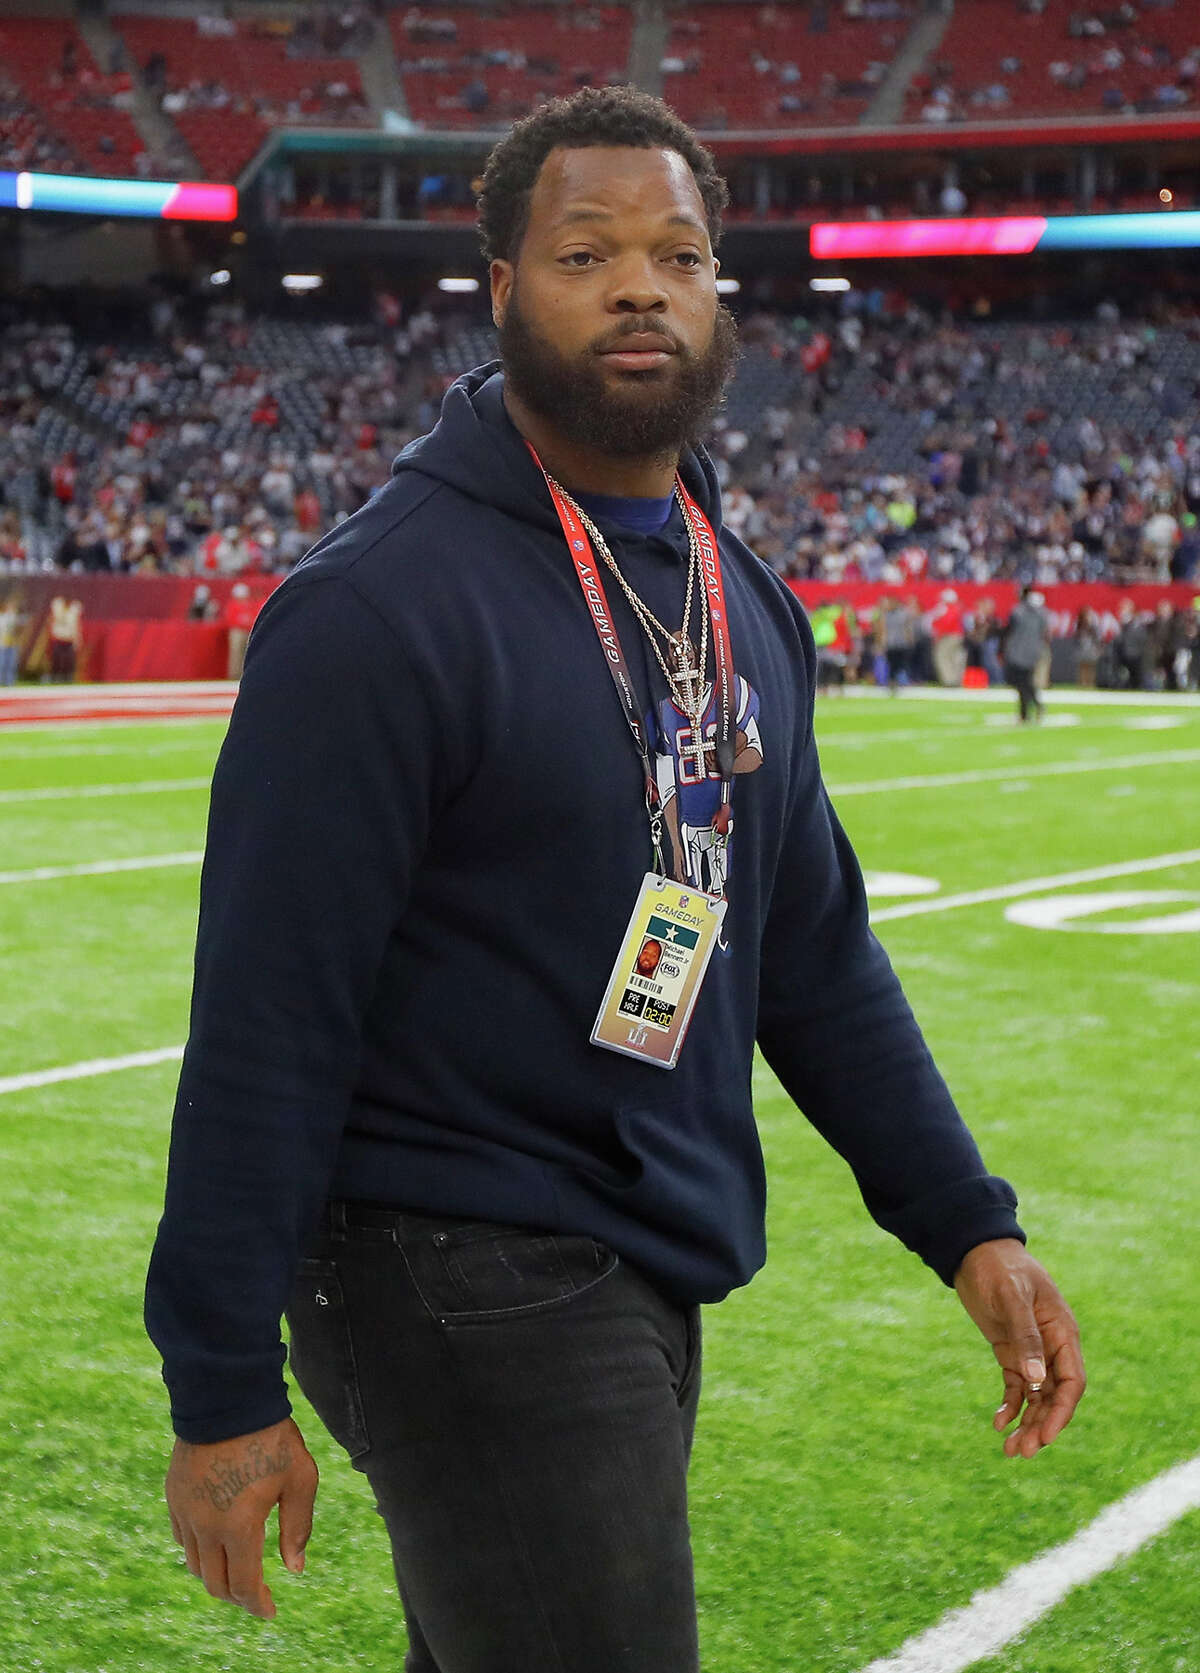 Michael Bennett Jr. of the Seattle Seahawks walks on the sideline before Super Bowl LI between the New England Patriots and the Atlanta Falcons at NRG Stadium on February 5, 2017 in Houston, Texas.